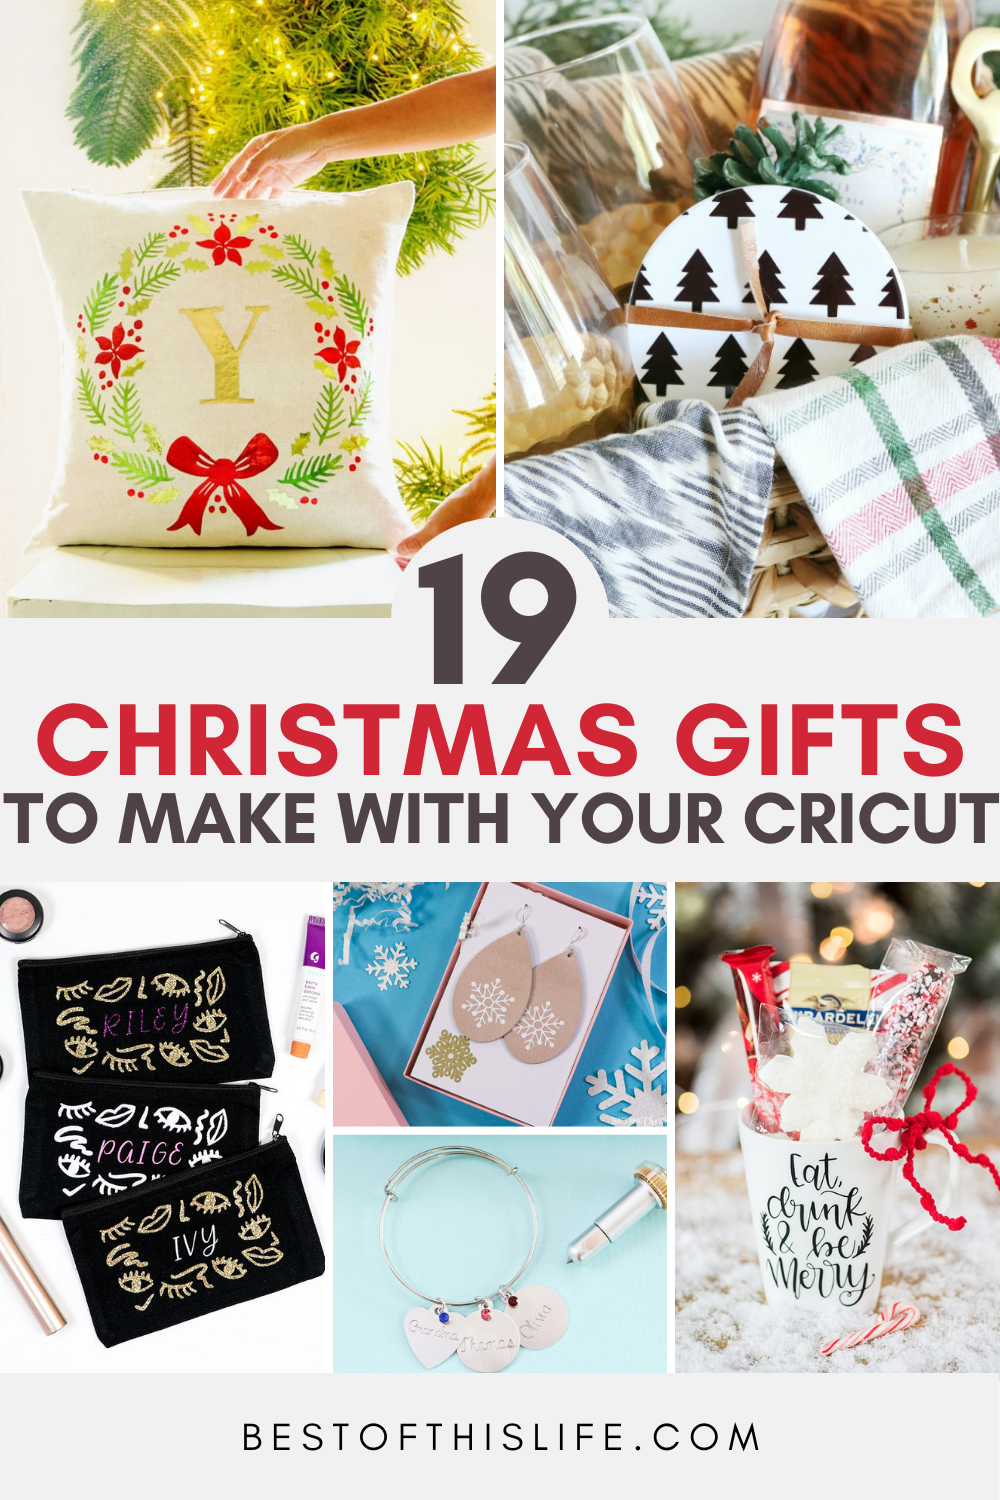 31+ Crafty Christmas Gifts 2021